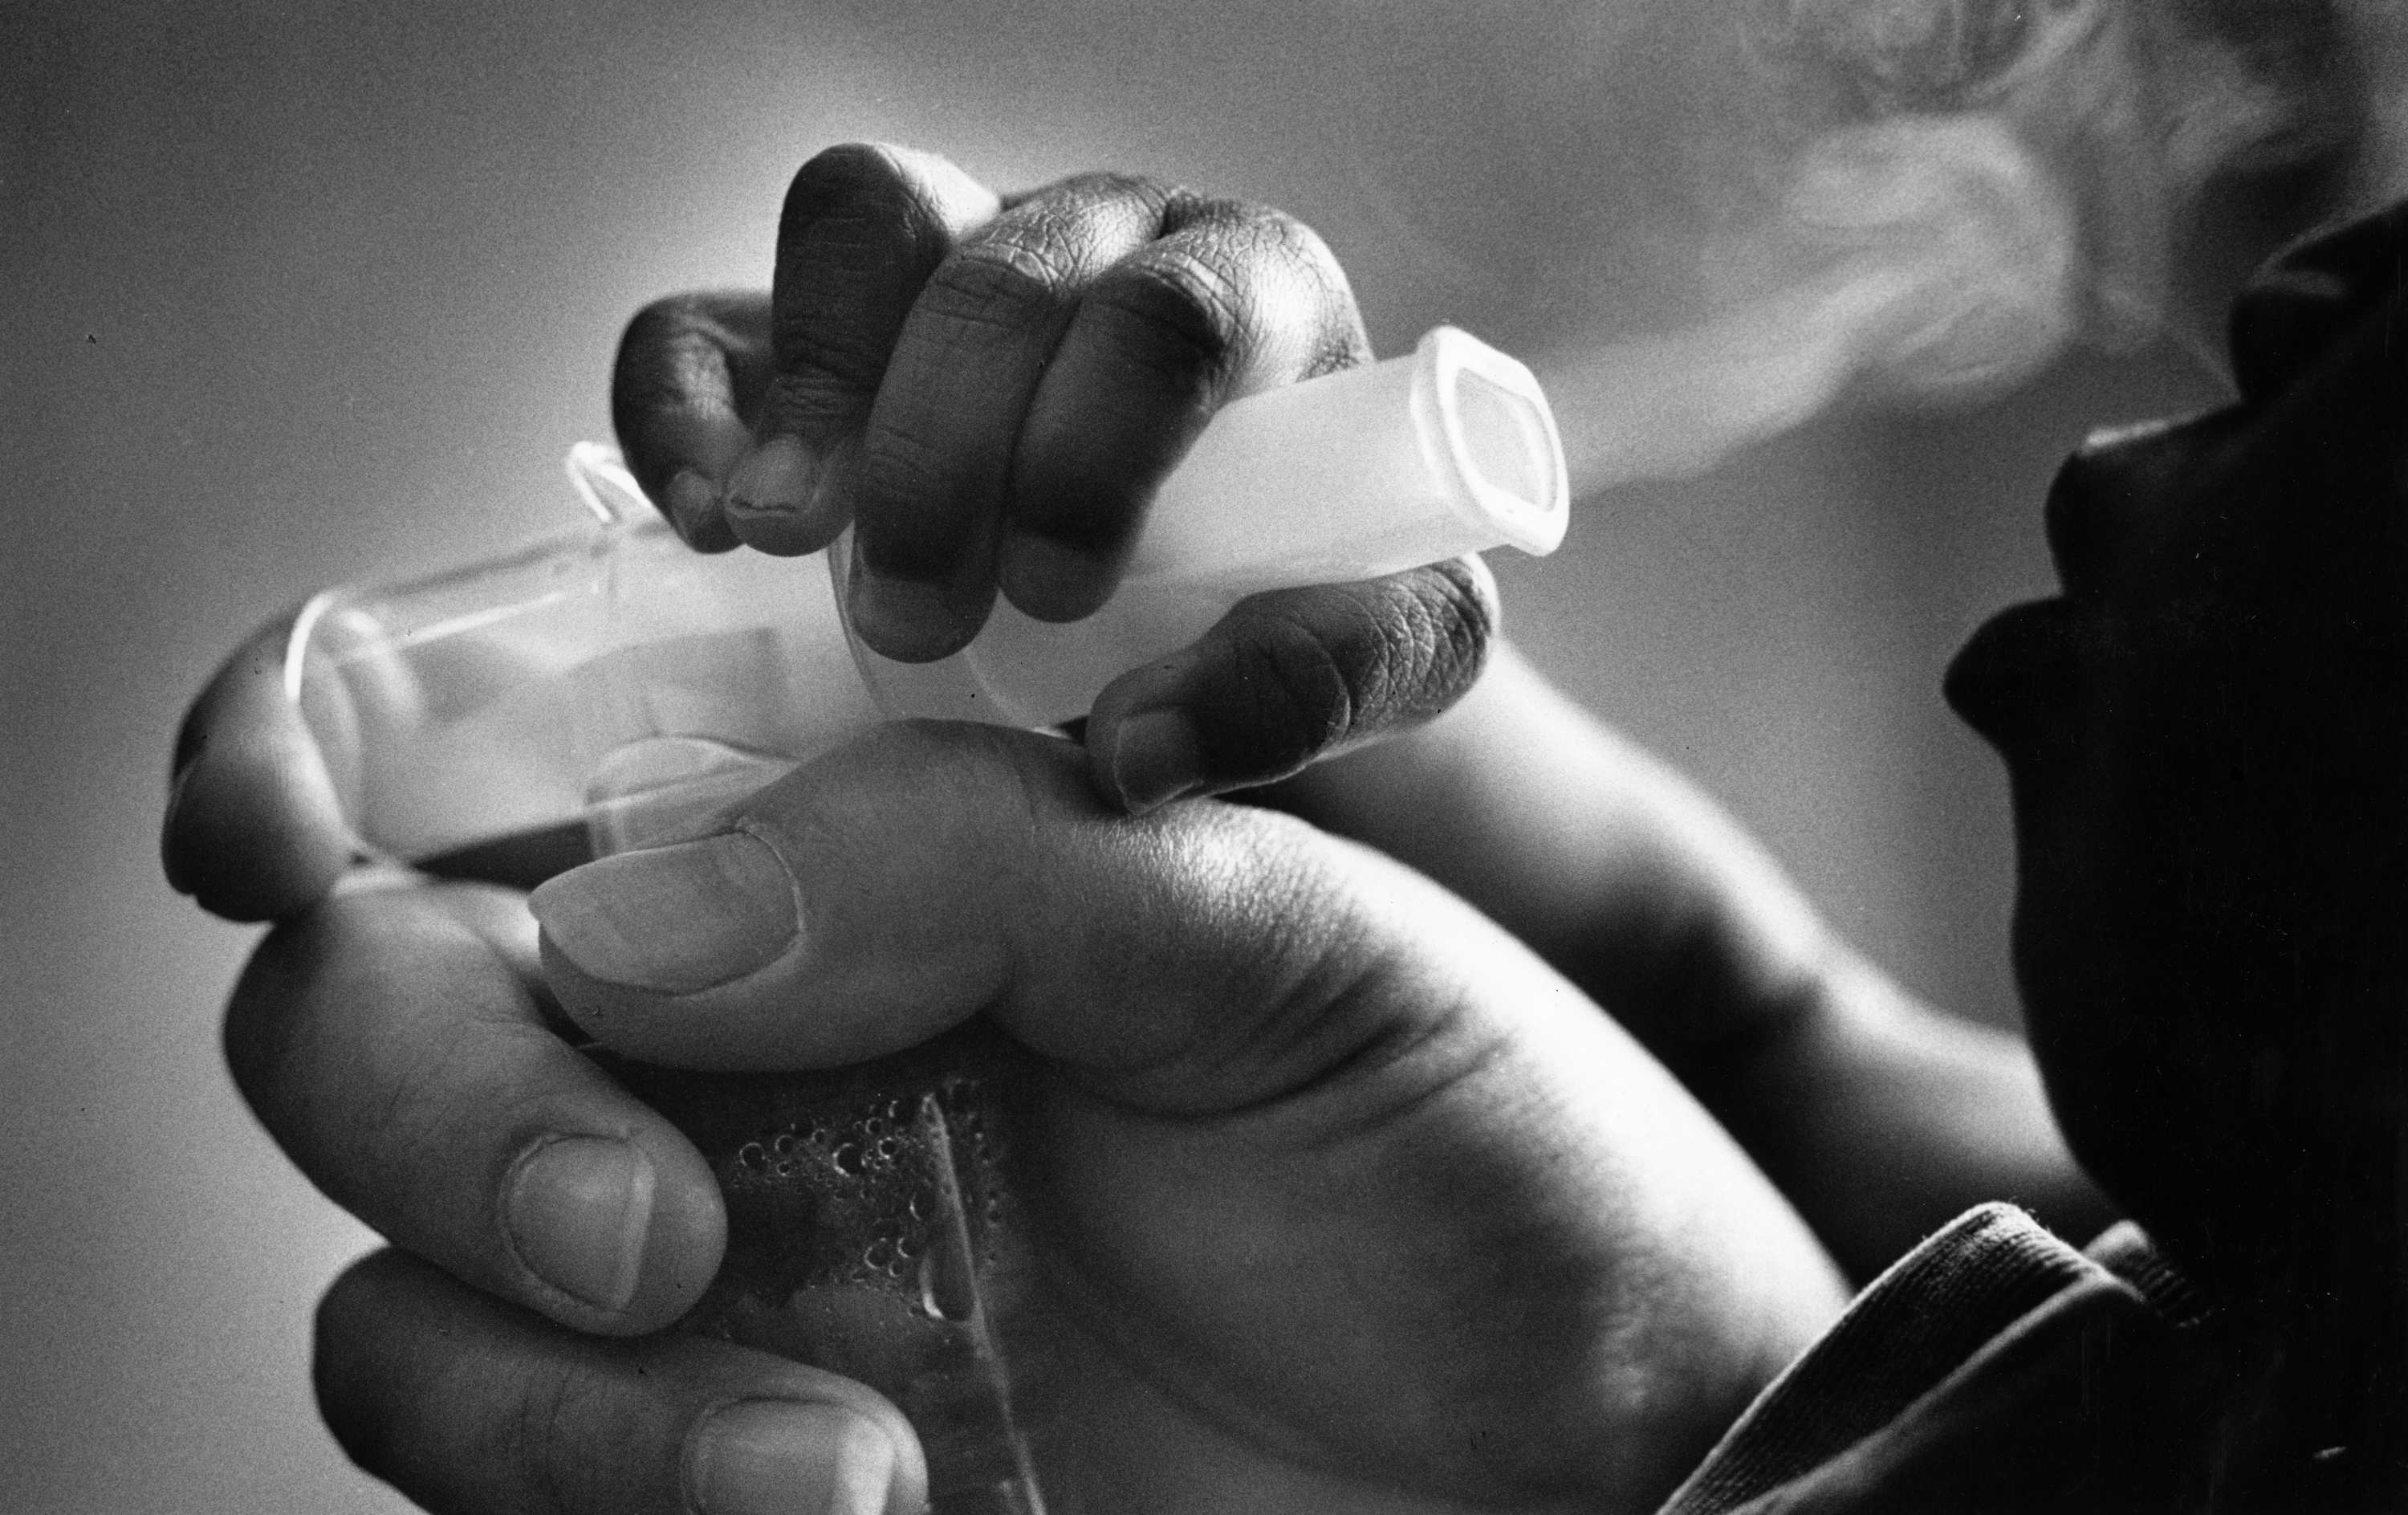 A foster child has an inhaler directed to his mouth so that he can ingest a medicated mist. The boy's mother used crack cocaine during her pregnancy. This photo ran in a <i>Boston Globe</i> story titled "Crack's Costly Legacy on Babies" in 1990. (Boston Globe&mdash;Boston Globe via Getty Images)